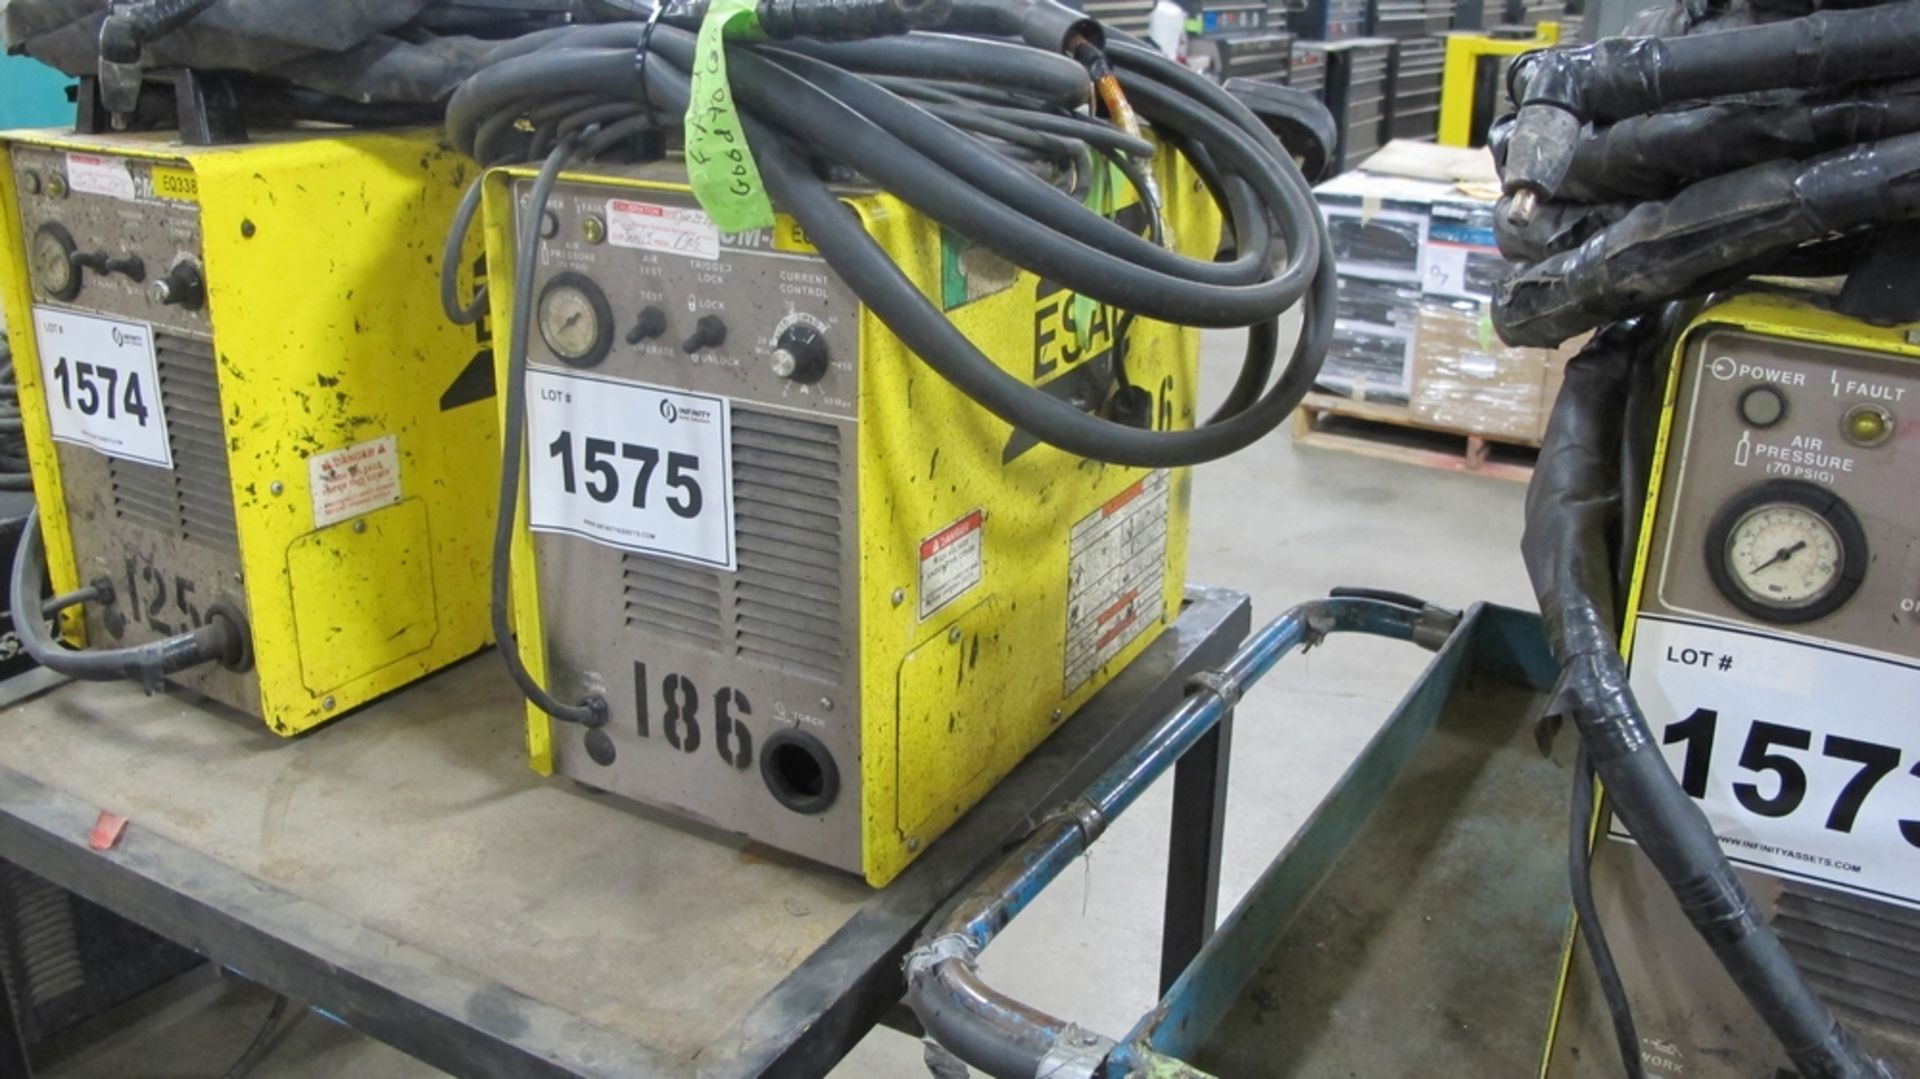 ESAB CM875 MIG WELDER W/TABLE (100 SHIRLEY AVE KITCHENER) - Image 2 of 4